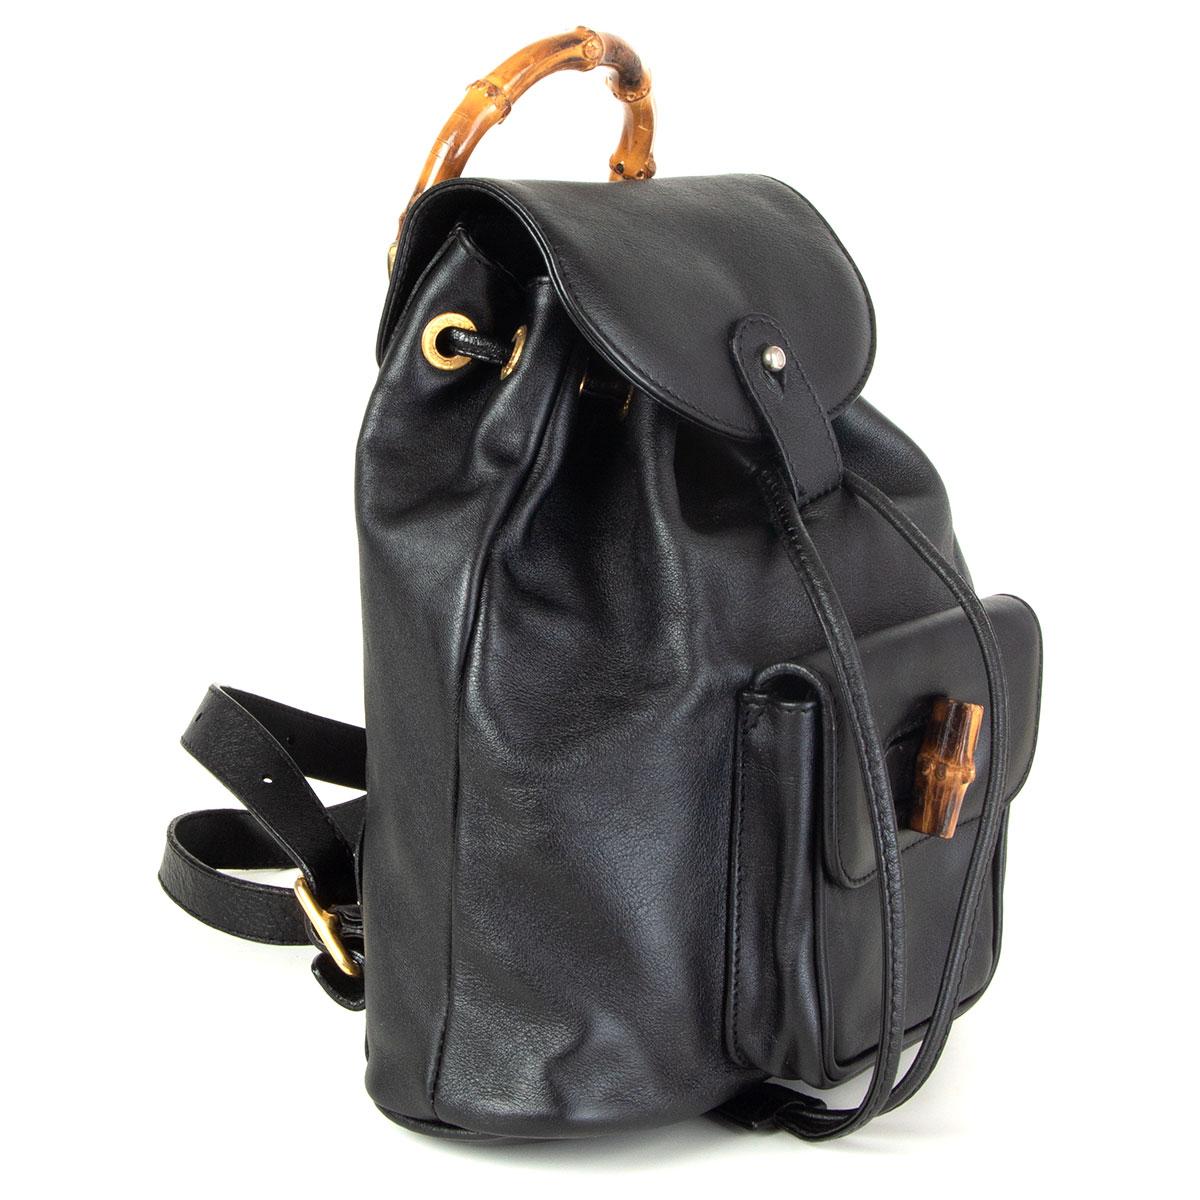 Gucci vintage backpack in black calfskin with gold-tone hardware, bamboo top handle, dual adjustable flat shoulder straps, one exterior cargo pocket with bamboo turn-lock closures. Lined in black canvas with one zipper pocket against the back.